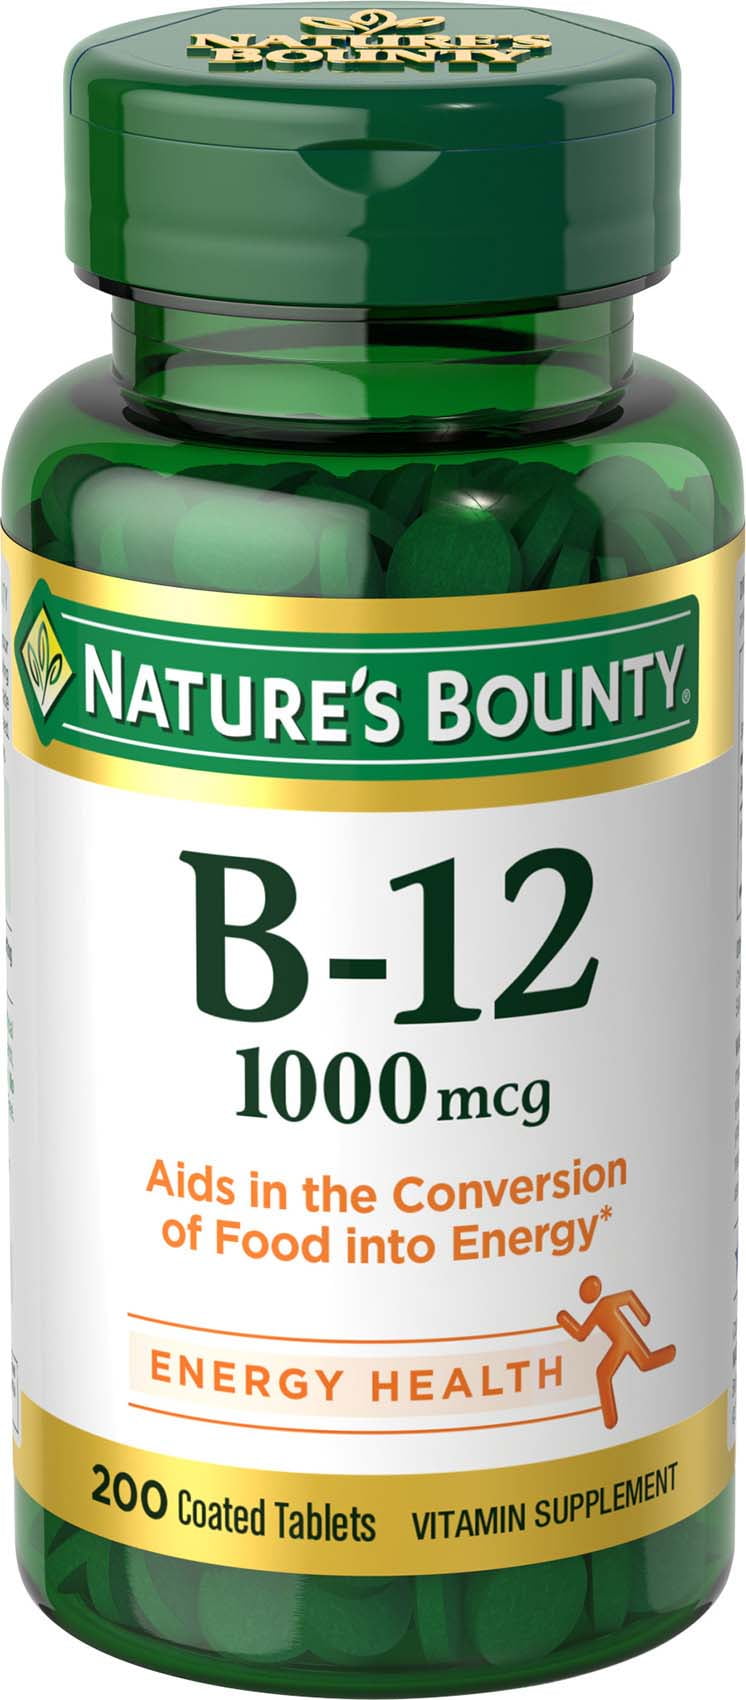 Natures Bounty Vitamin B12 Tablets 1000 Mcg 200 Count